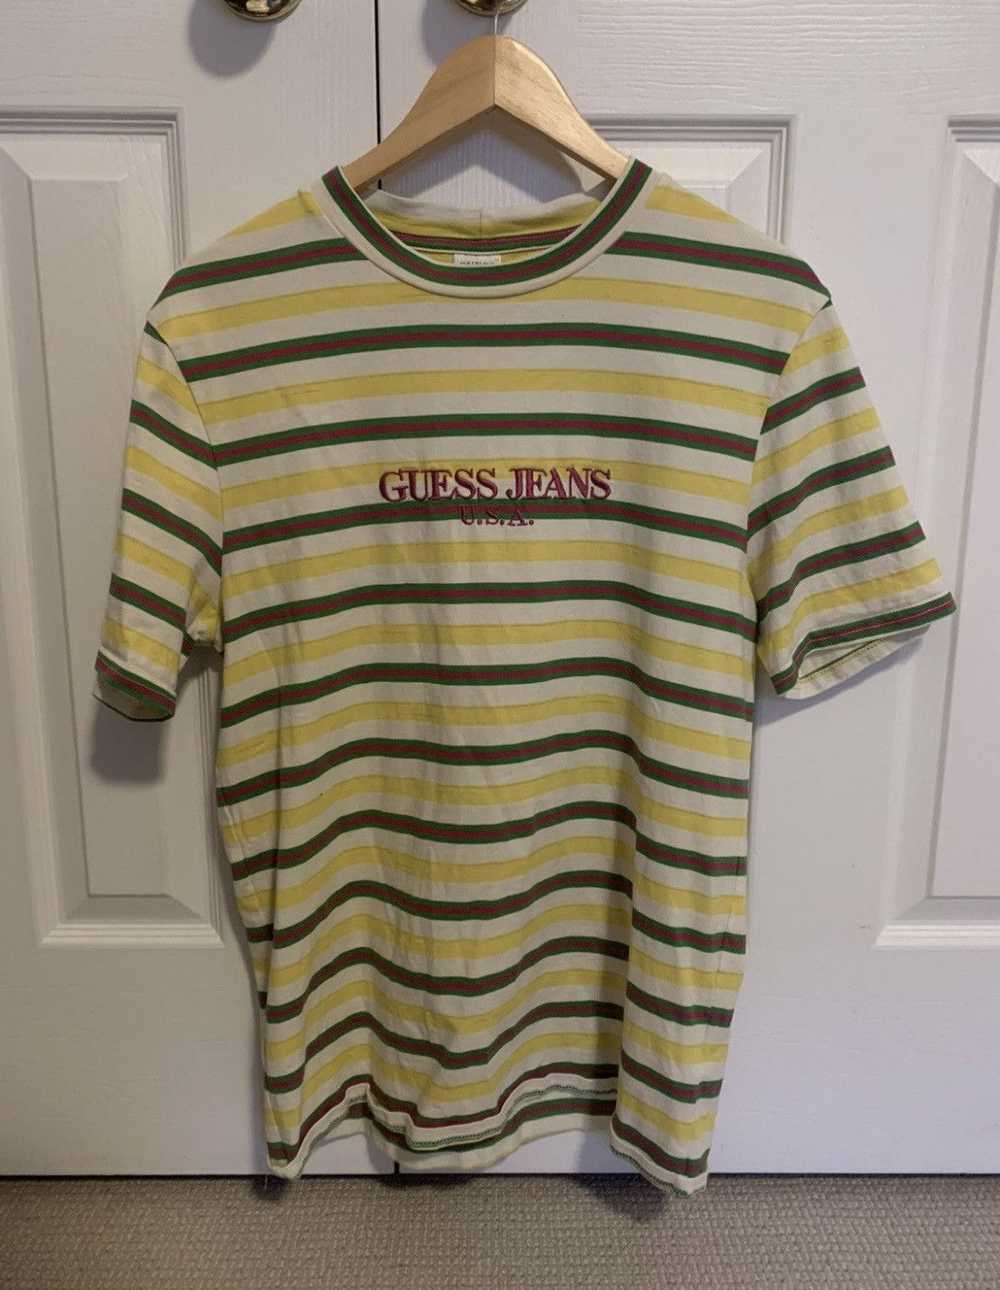 Guess Guess Jeans X Sean Wotherspoon - image 1